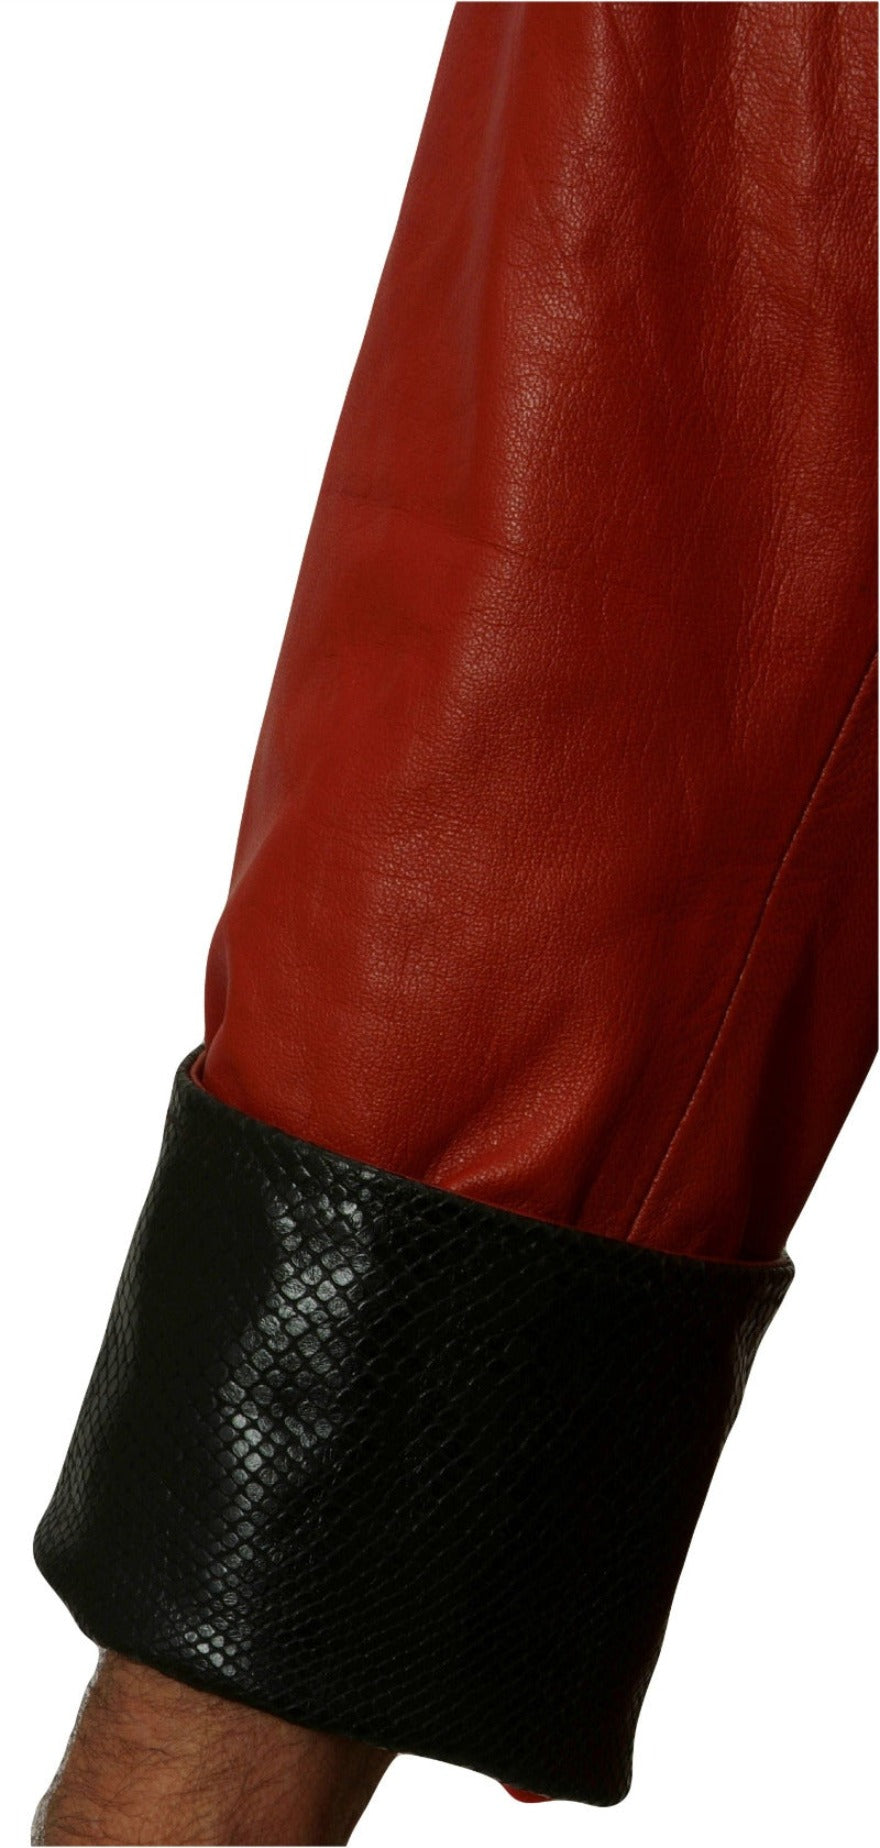 Picture of a model wearing our Red Snakeskin Leather Jacket with black snakeskin embossed collar and cuffs.  Close up view of the black snakeskin cuff.